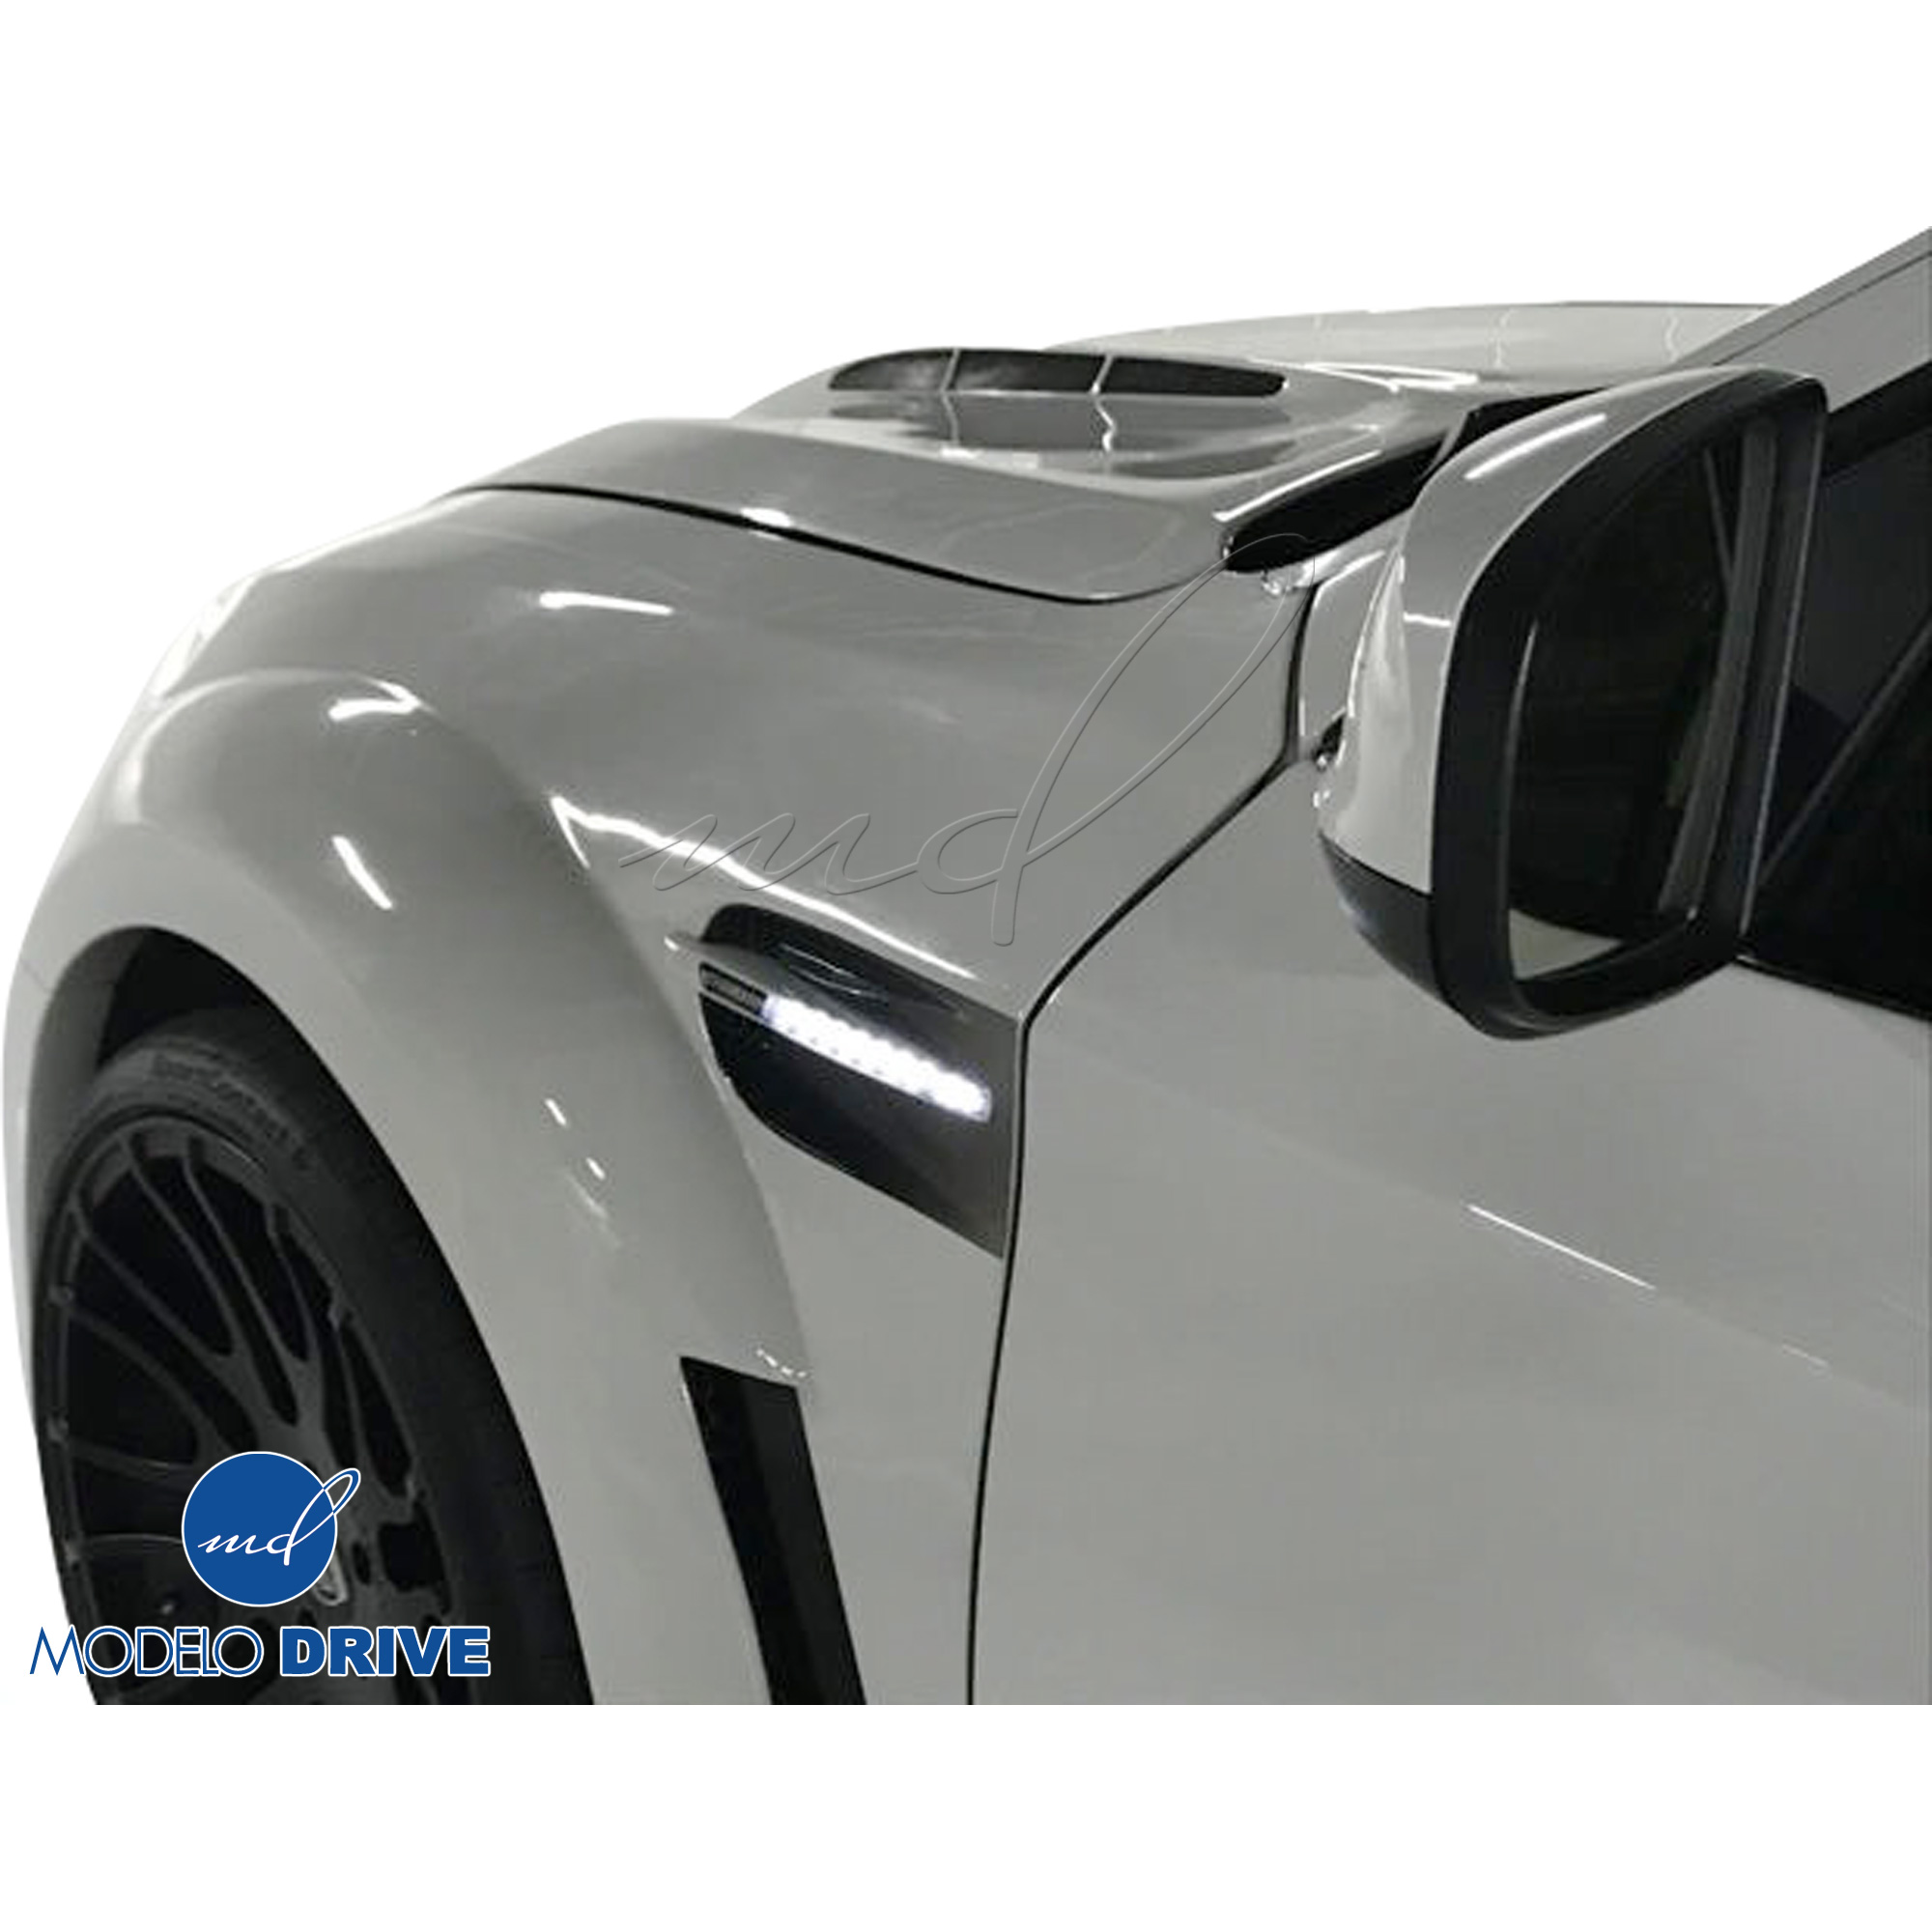 ModeloDrive FRP HAMA Wide Body Fenders (front) 2pc > BMW X6 E71 2008-2014 - Image 3